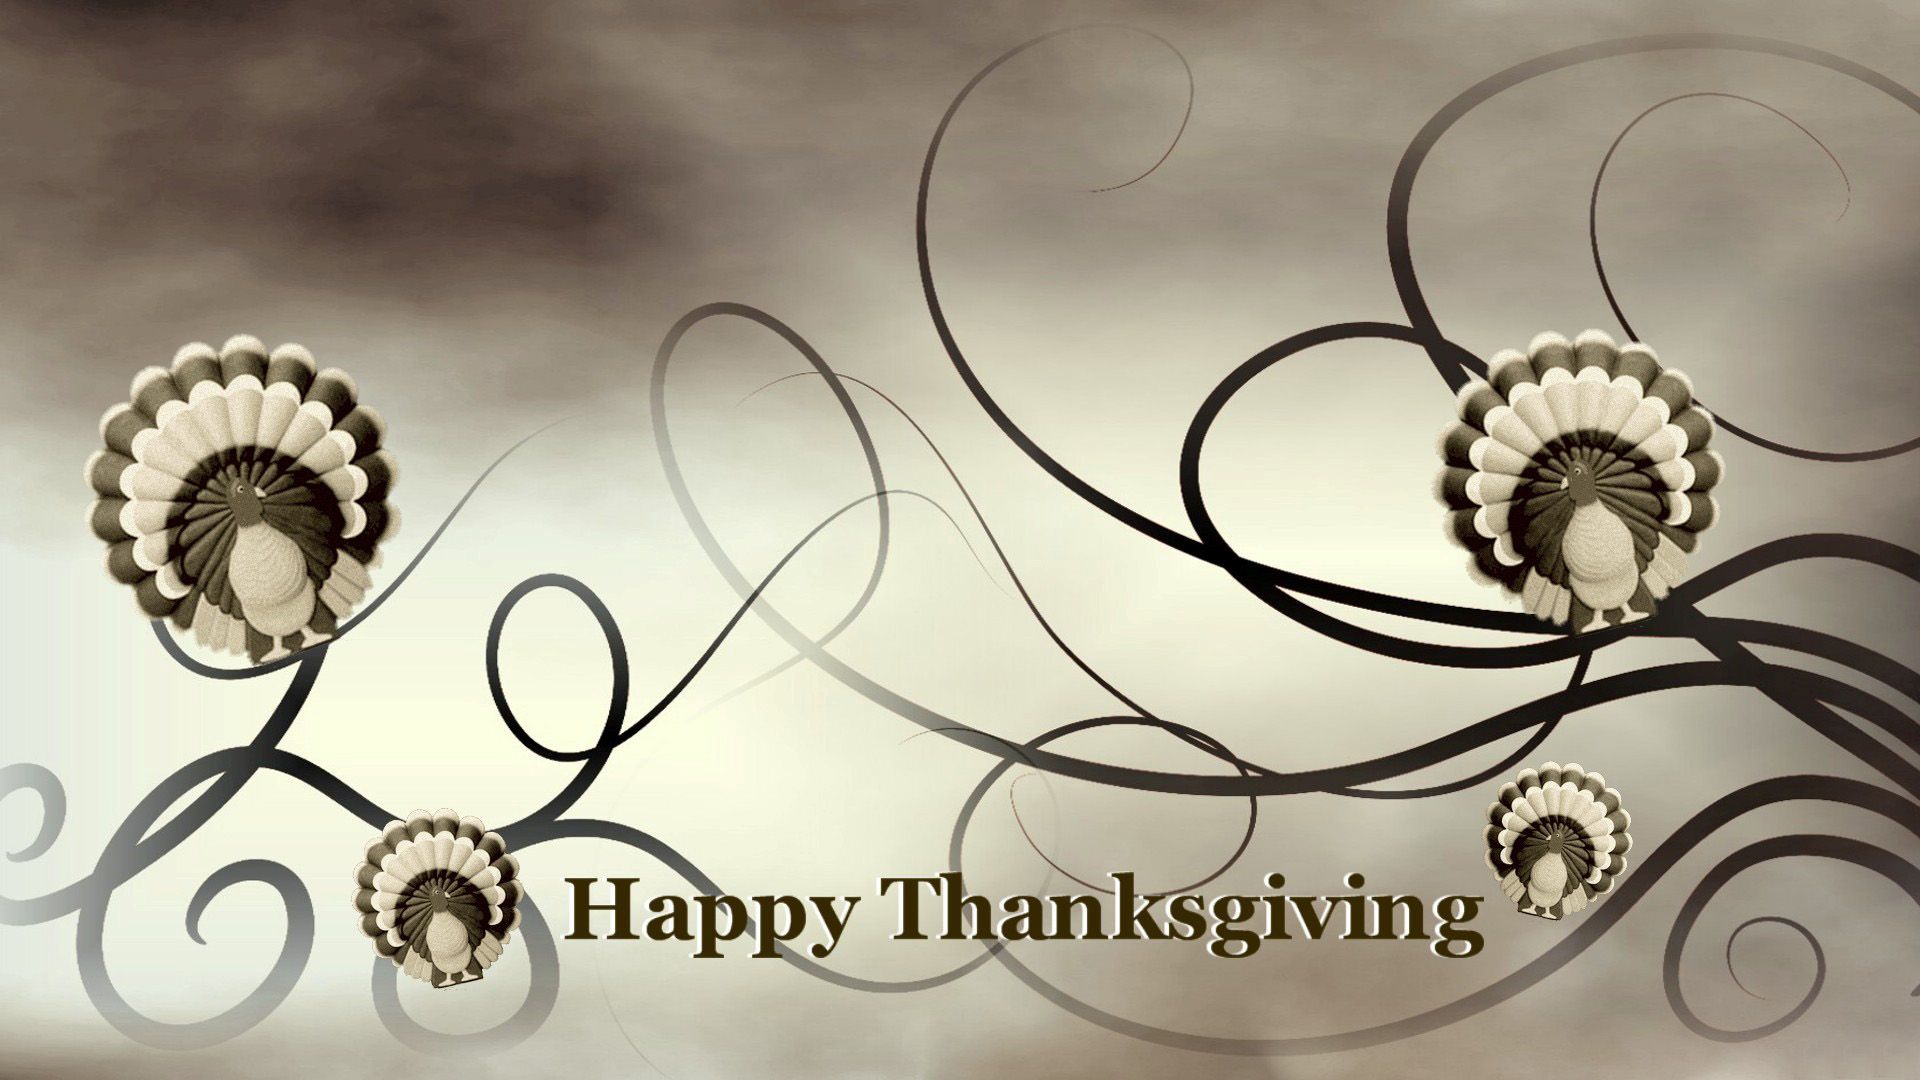 20 Free Thanksgiving Wallpapers For Desktop Backgrounds